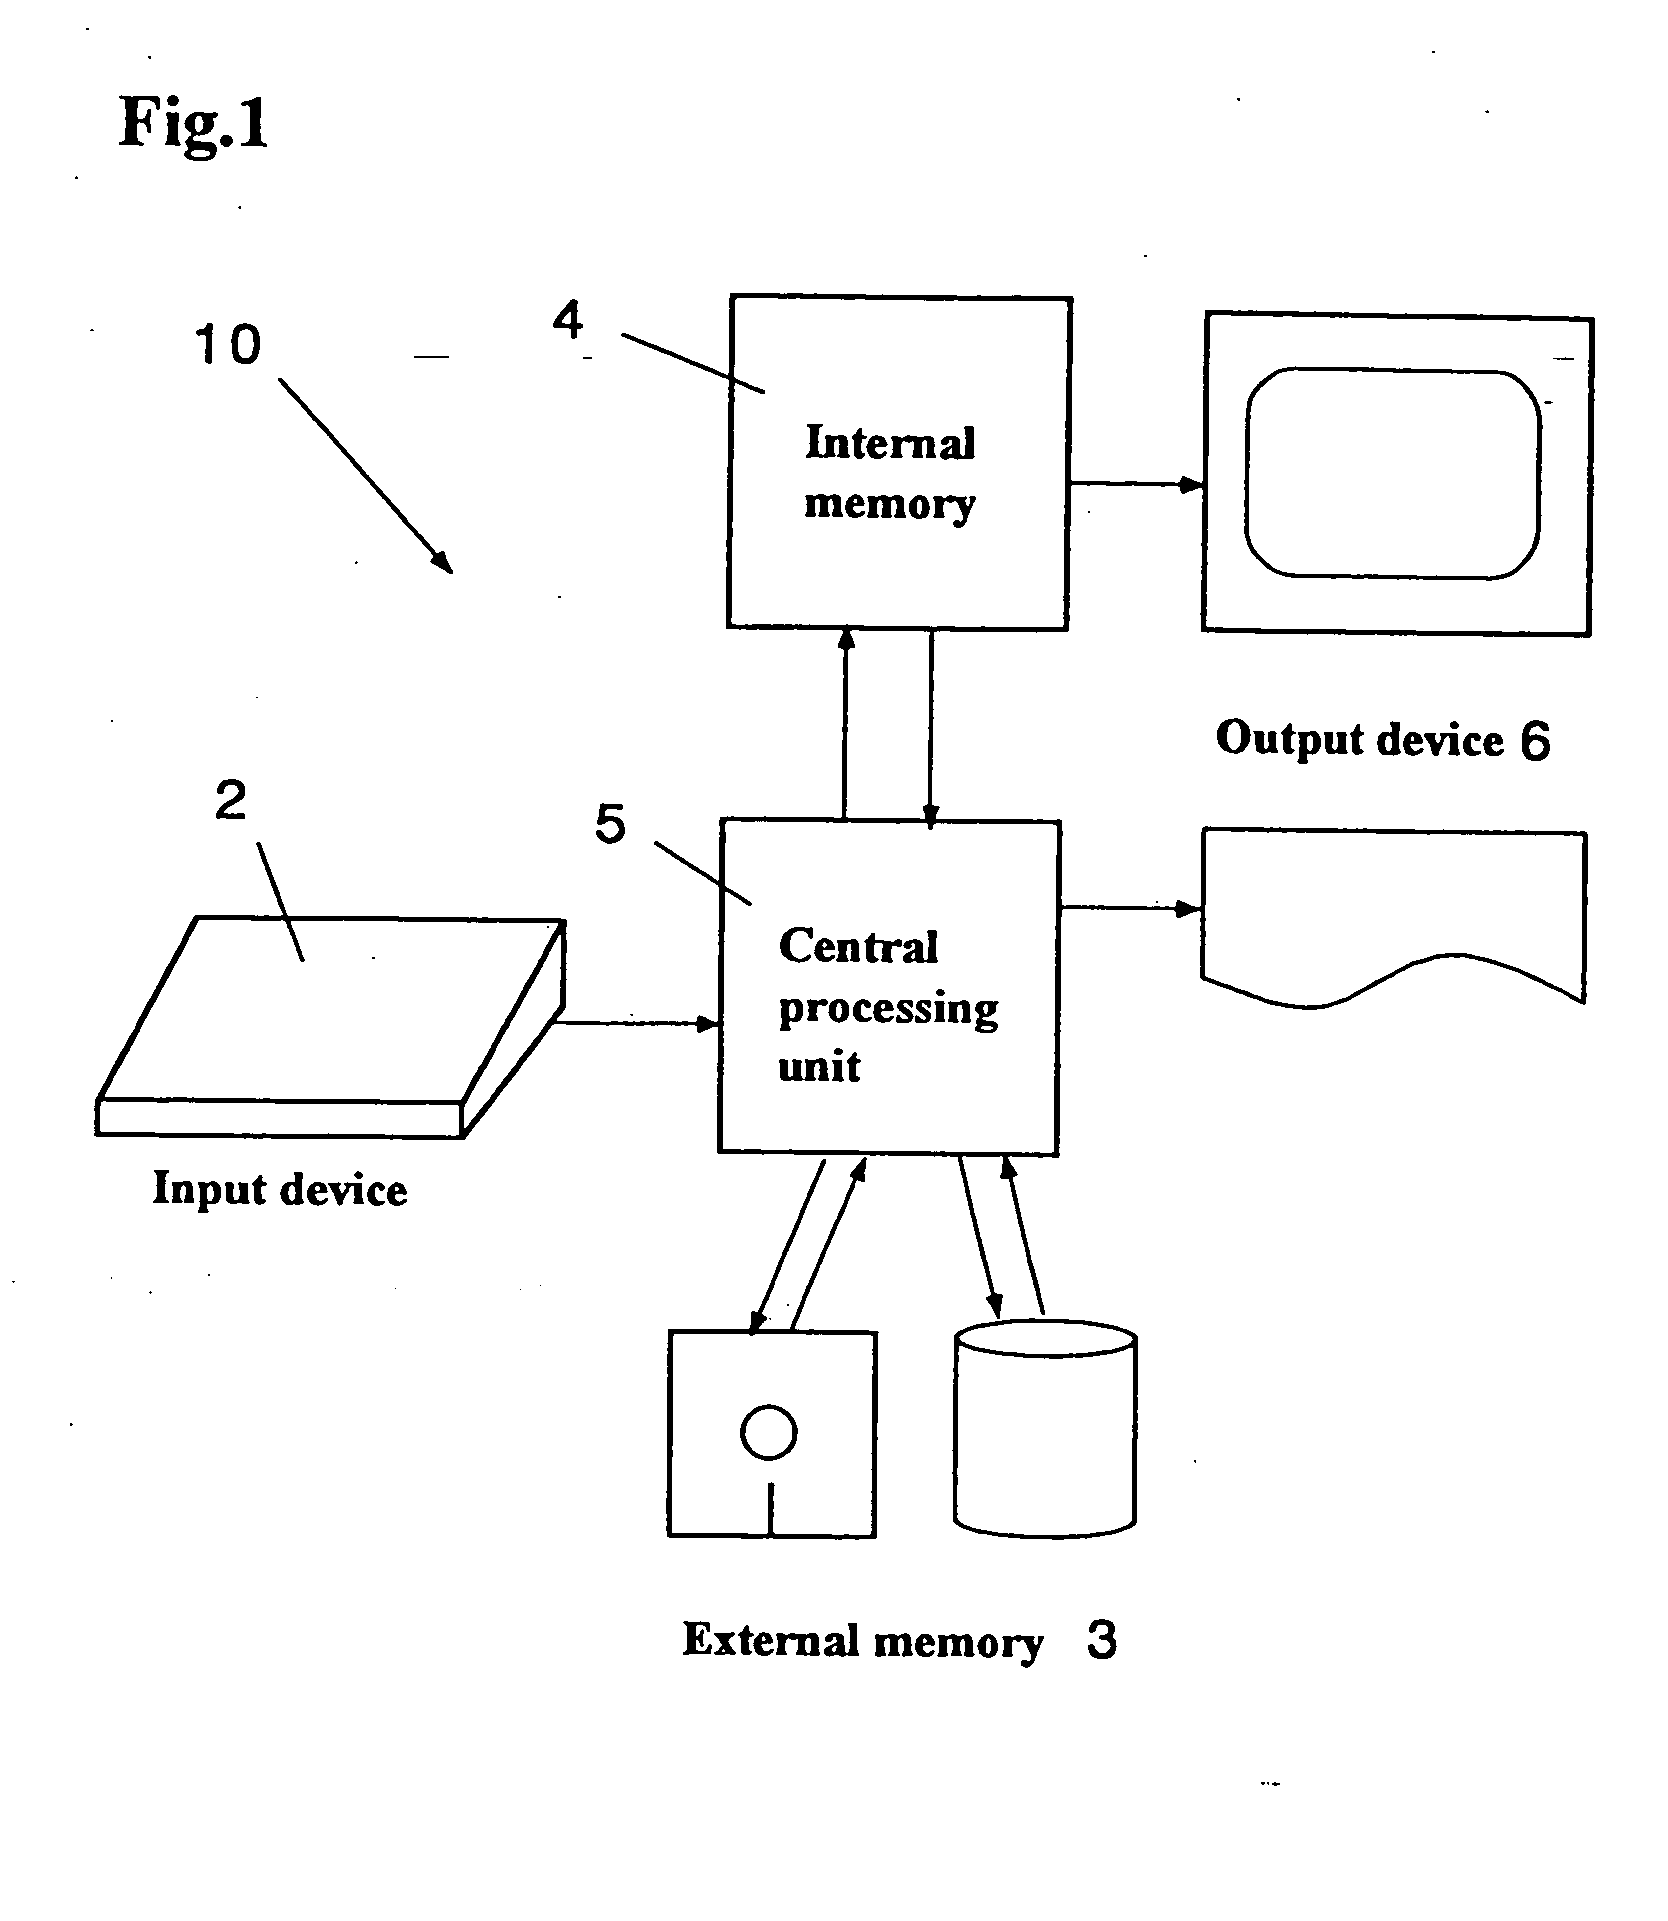 Method for storing entity data in which shape and physical quantity are integrated and storing program